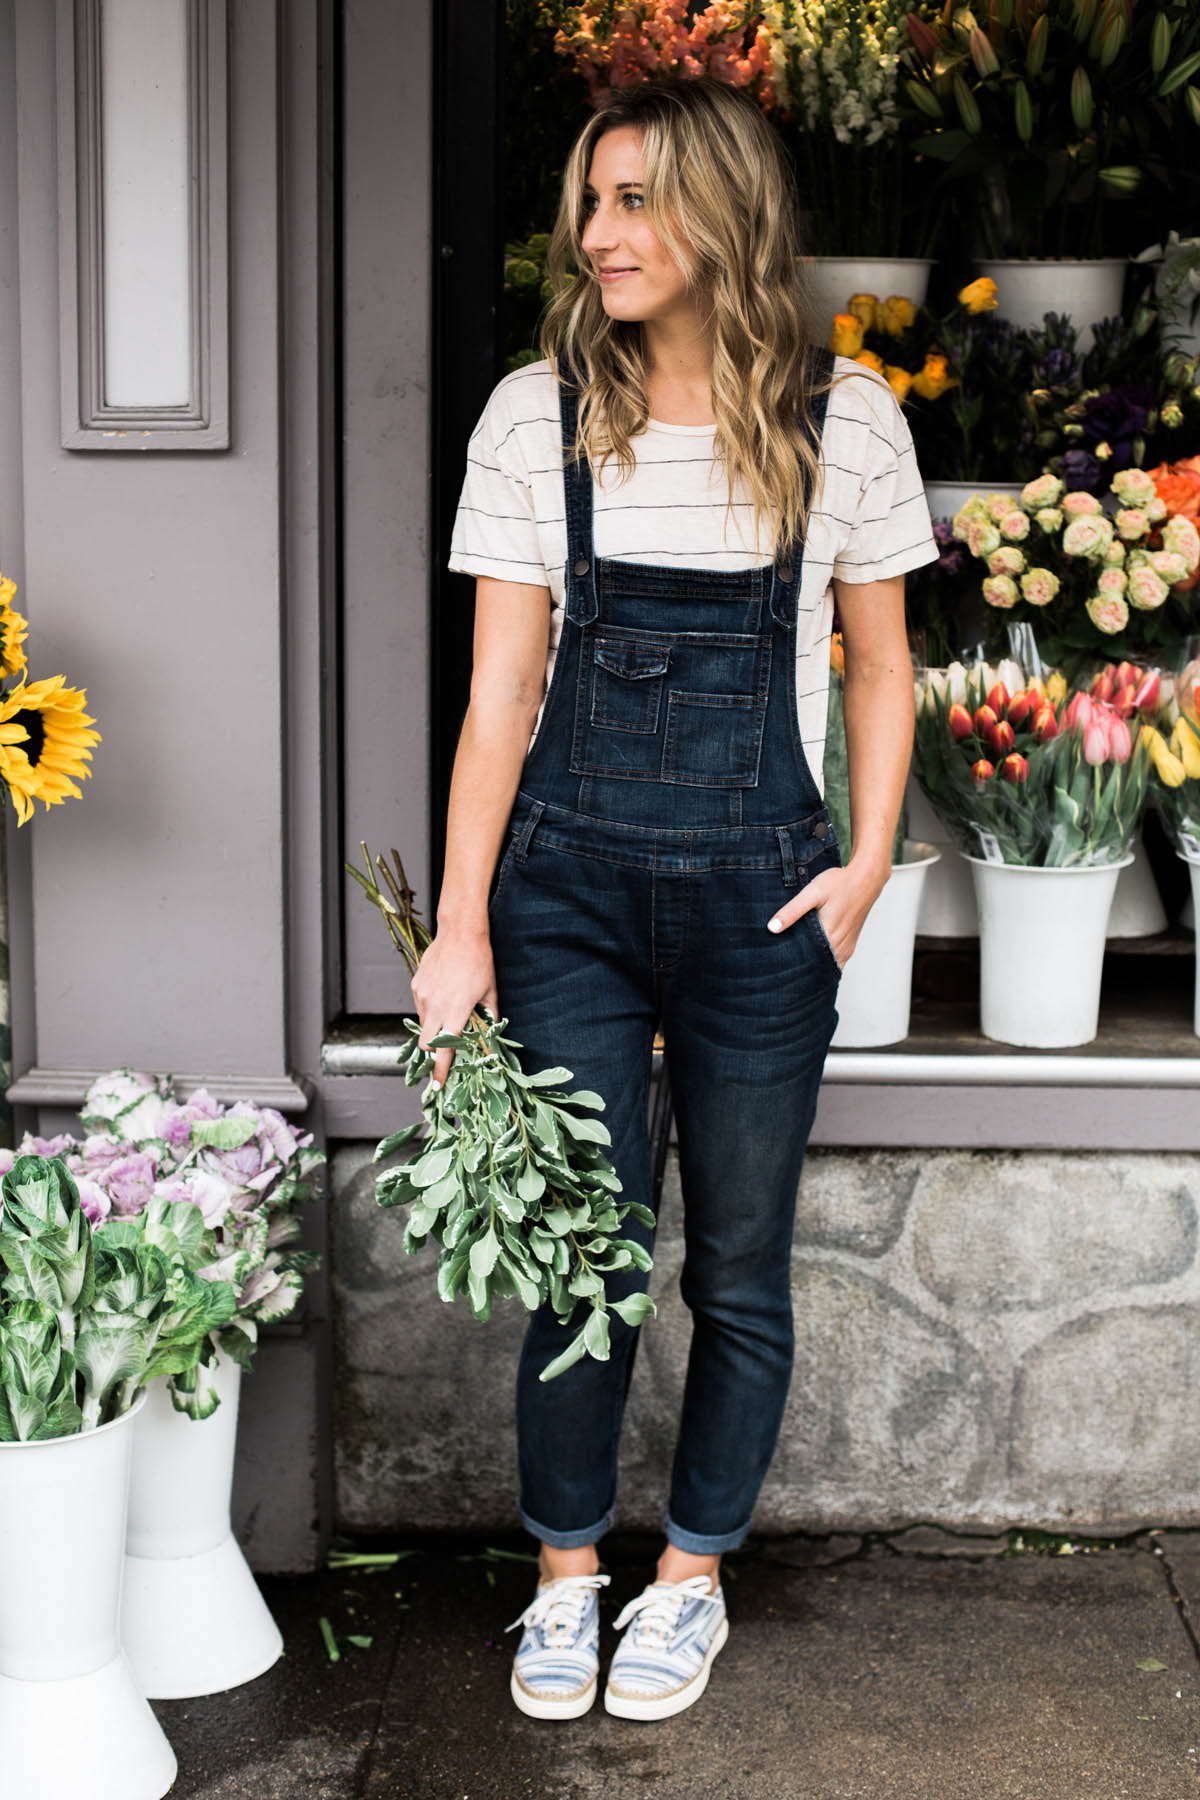 Free People denim overalls, Madewell striped tee, and wavy blonde hair